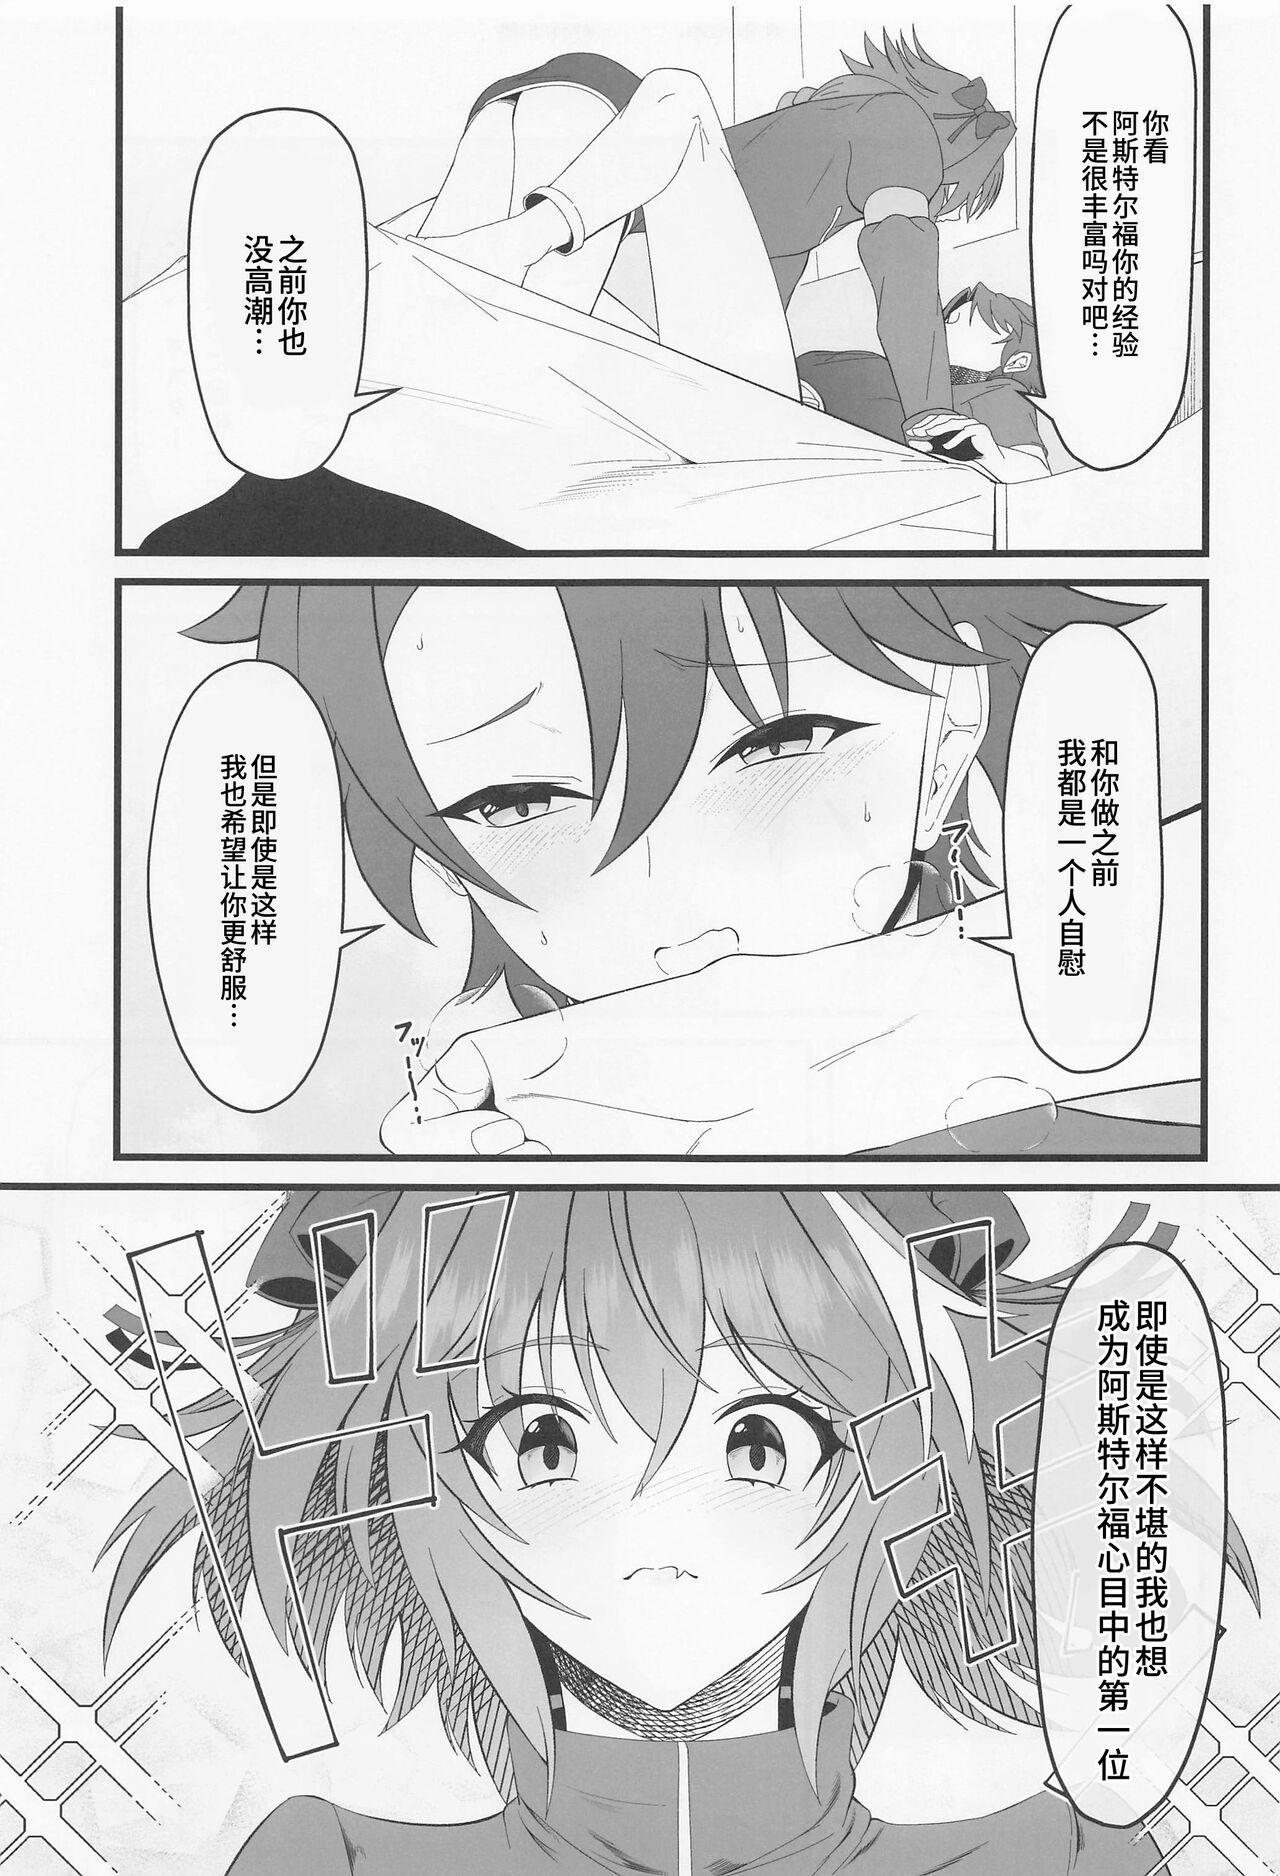 Shorts Kimi no Ichiban ni Naritakute - I wanted to be your number one. - Fate grand order Erotica - Page 8